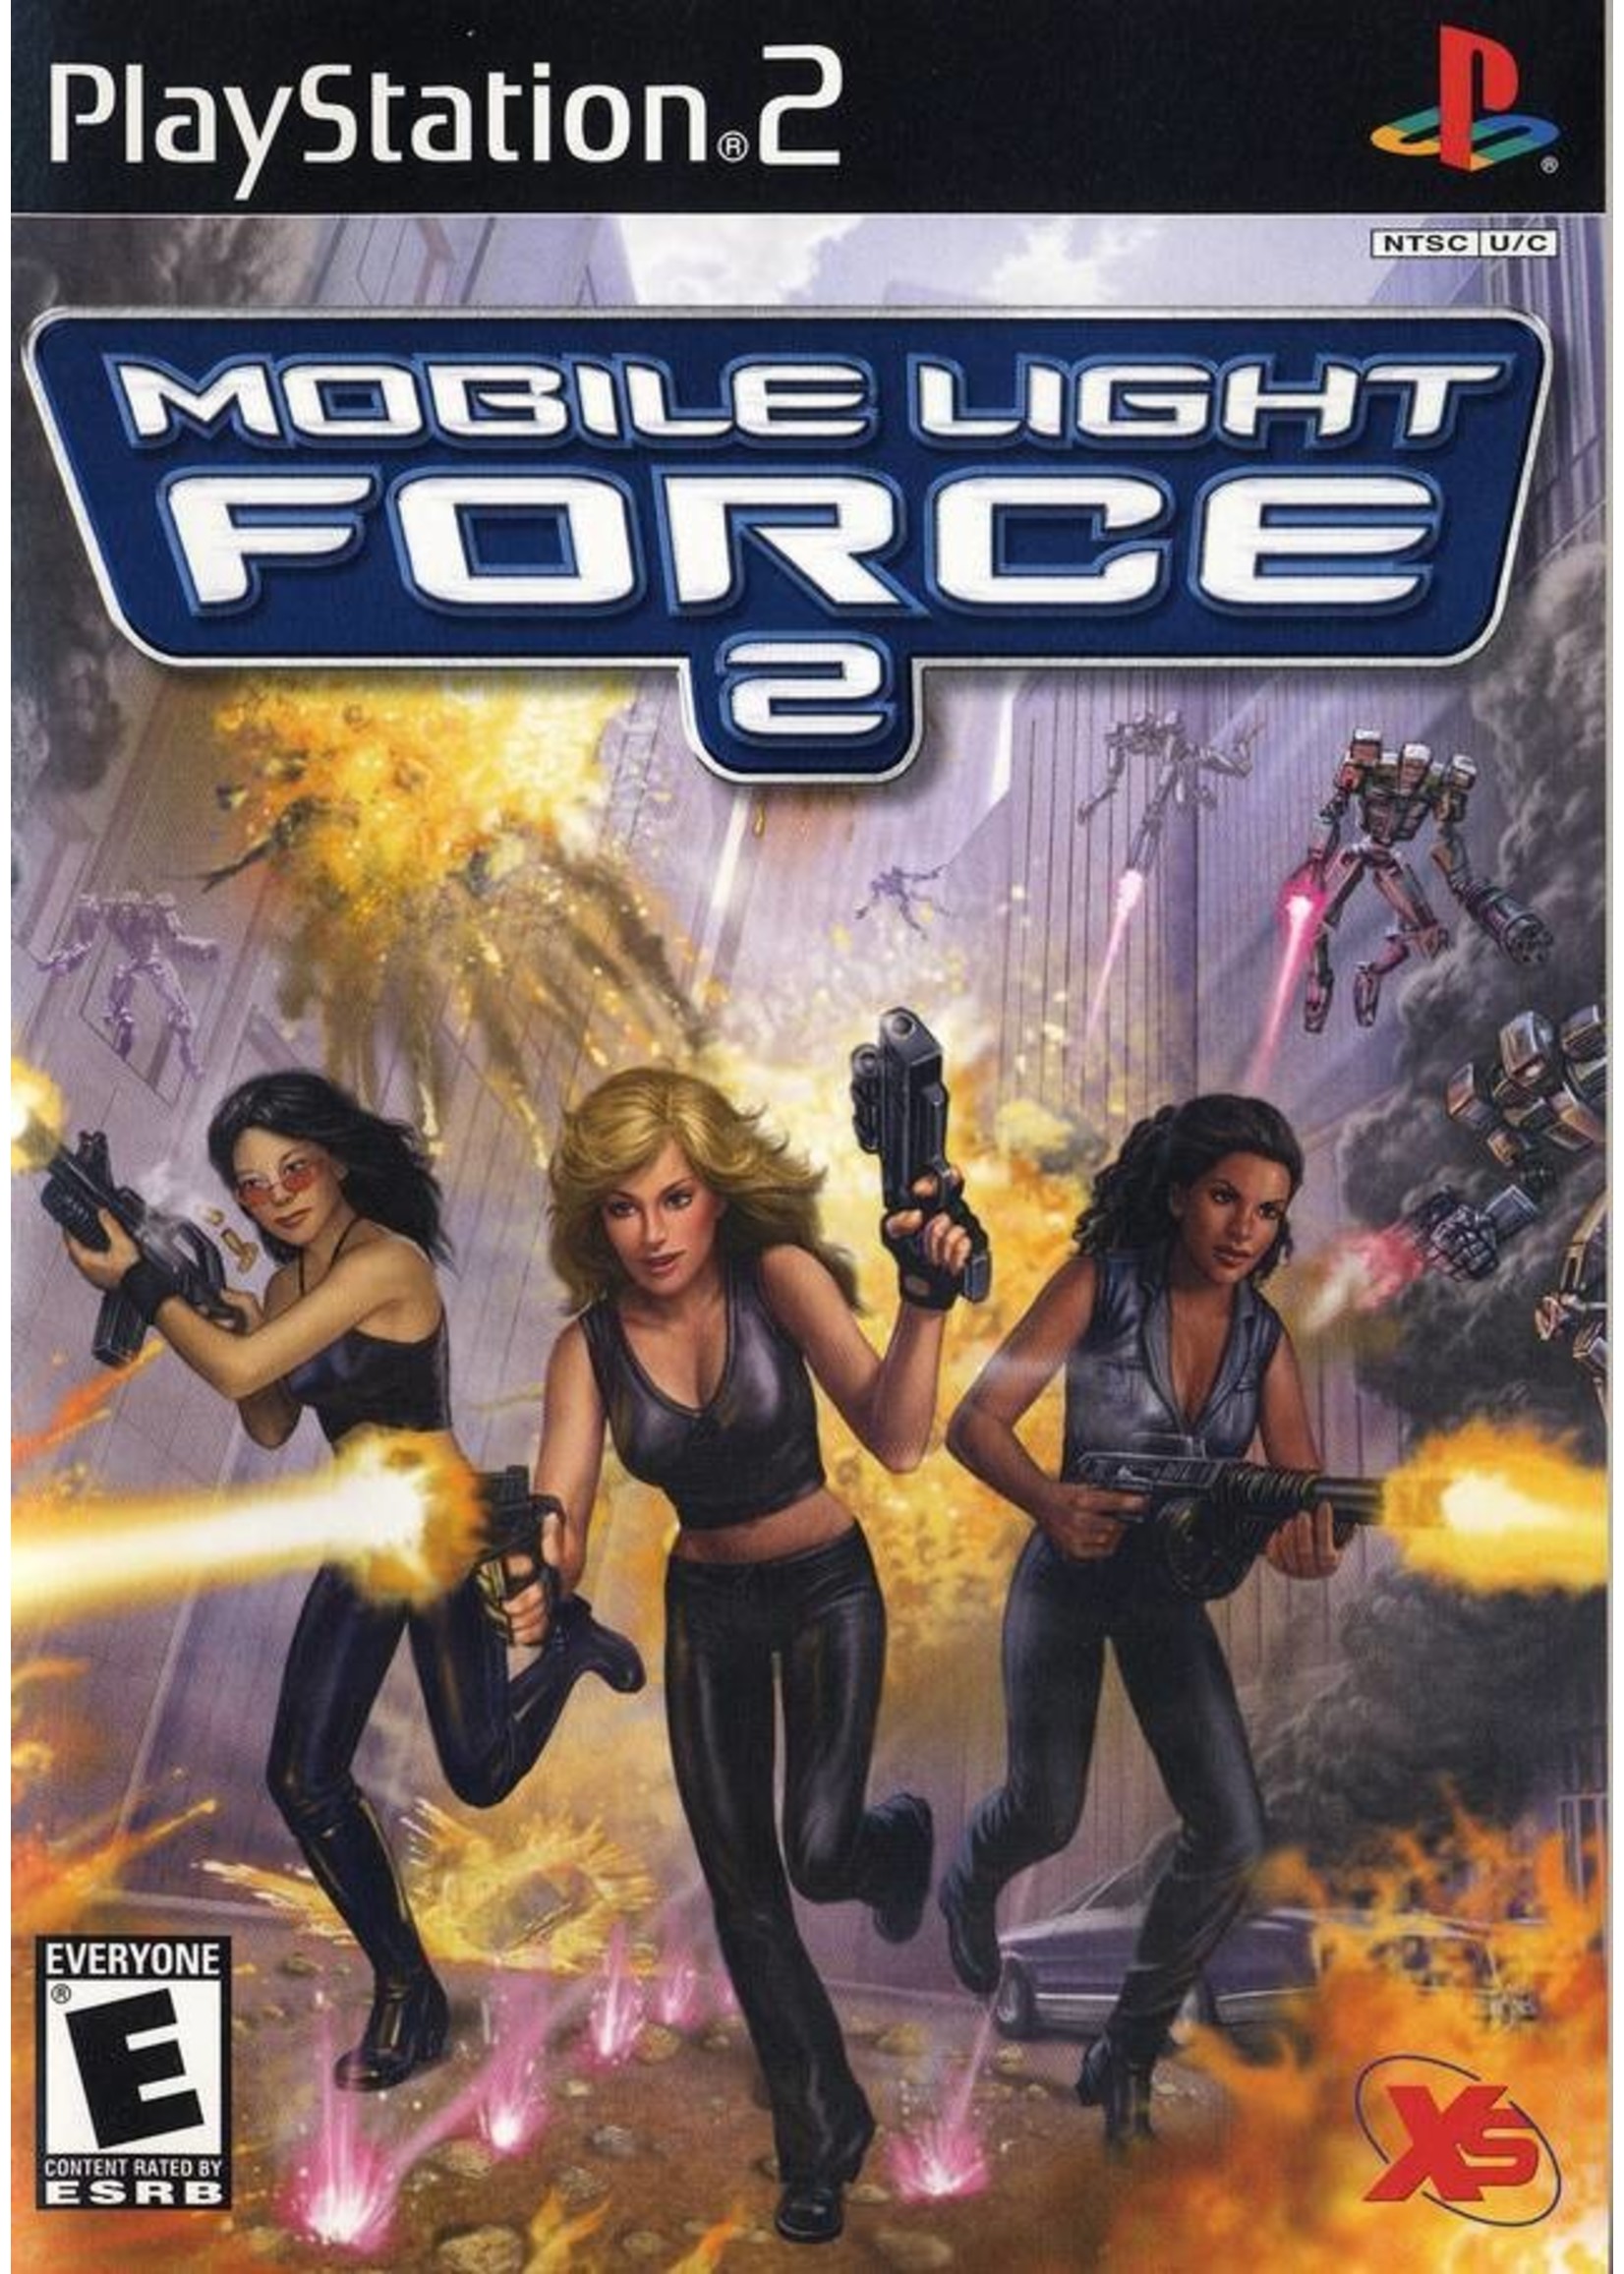 Sony Playstation 2 (PS2) Mobile Light Force 2